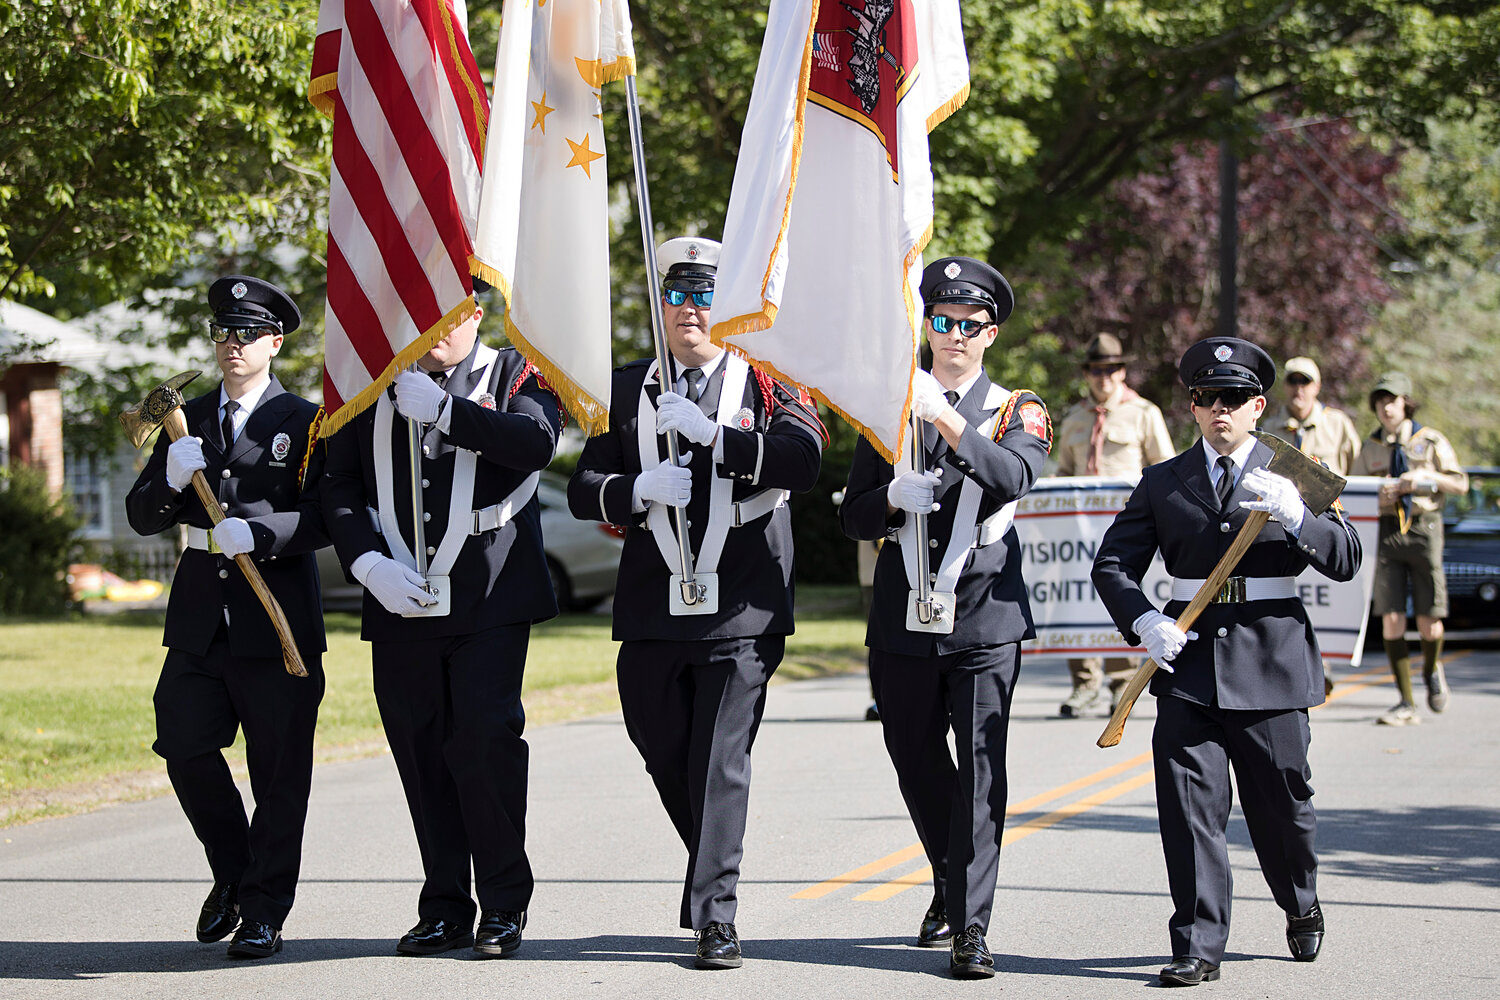 The Barrington Fire Department's Color Guard leads Barrington's Memorial Day parade up Upland Way.